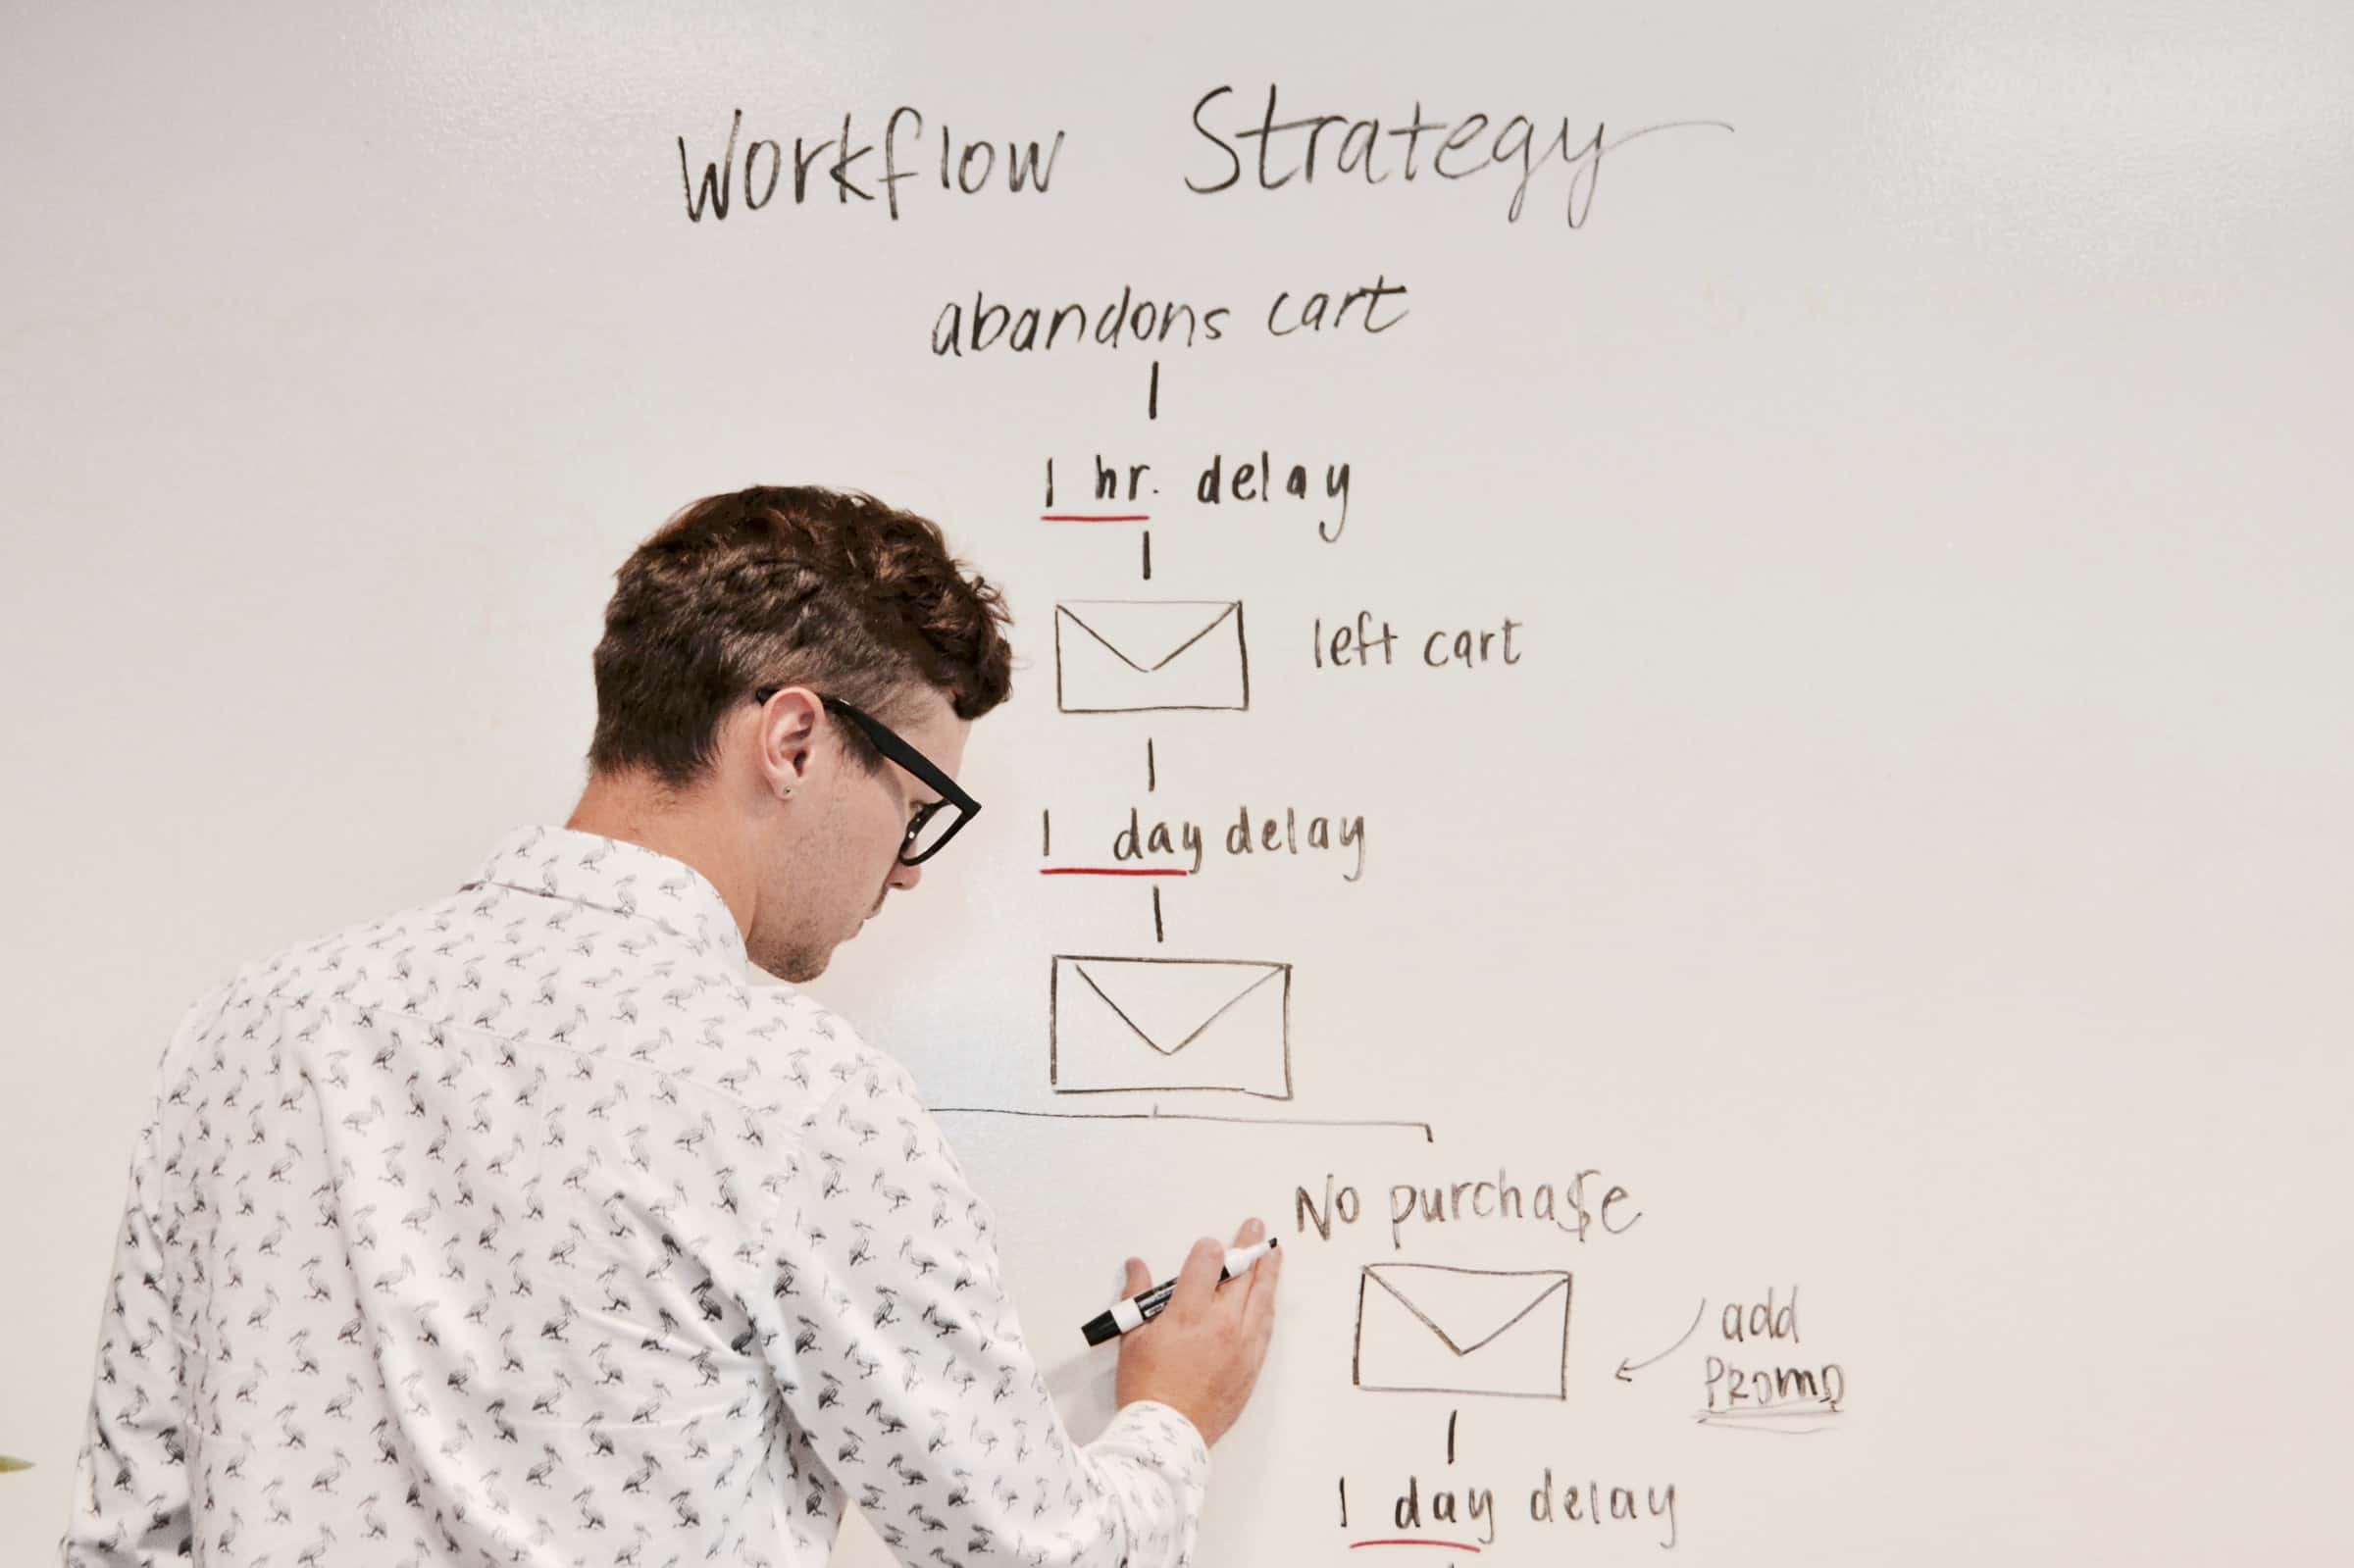 man writing out a business workflow strategy on a whiteboard for crm marketing automation article